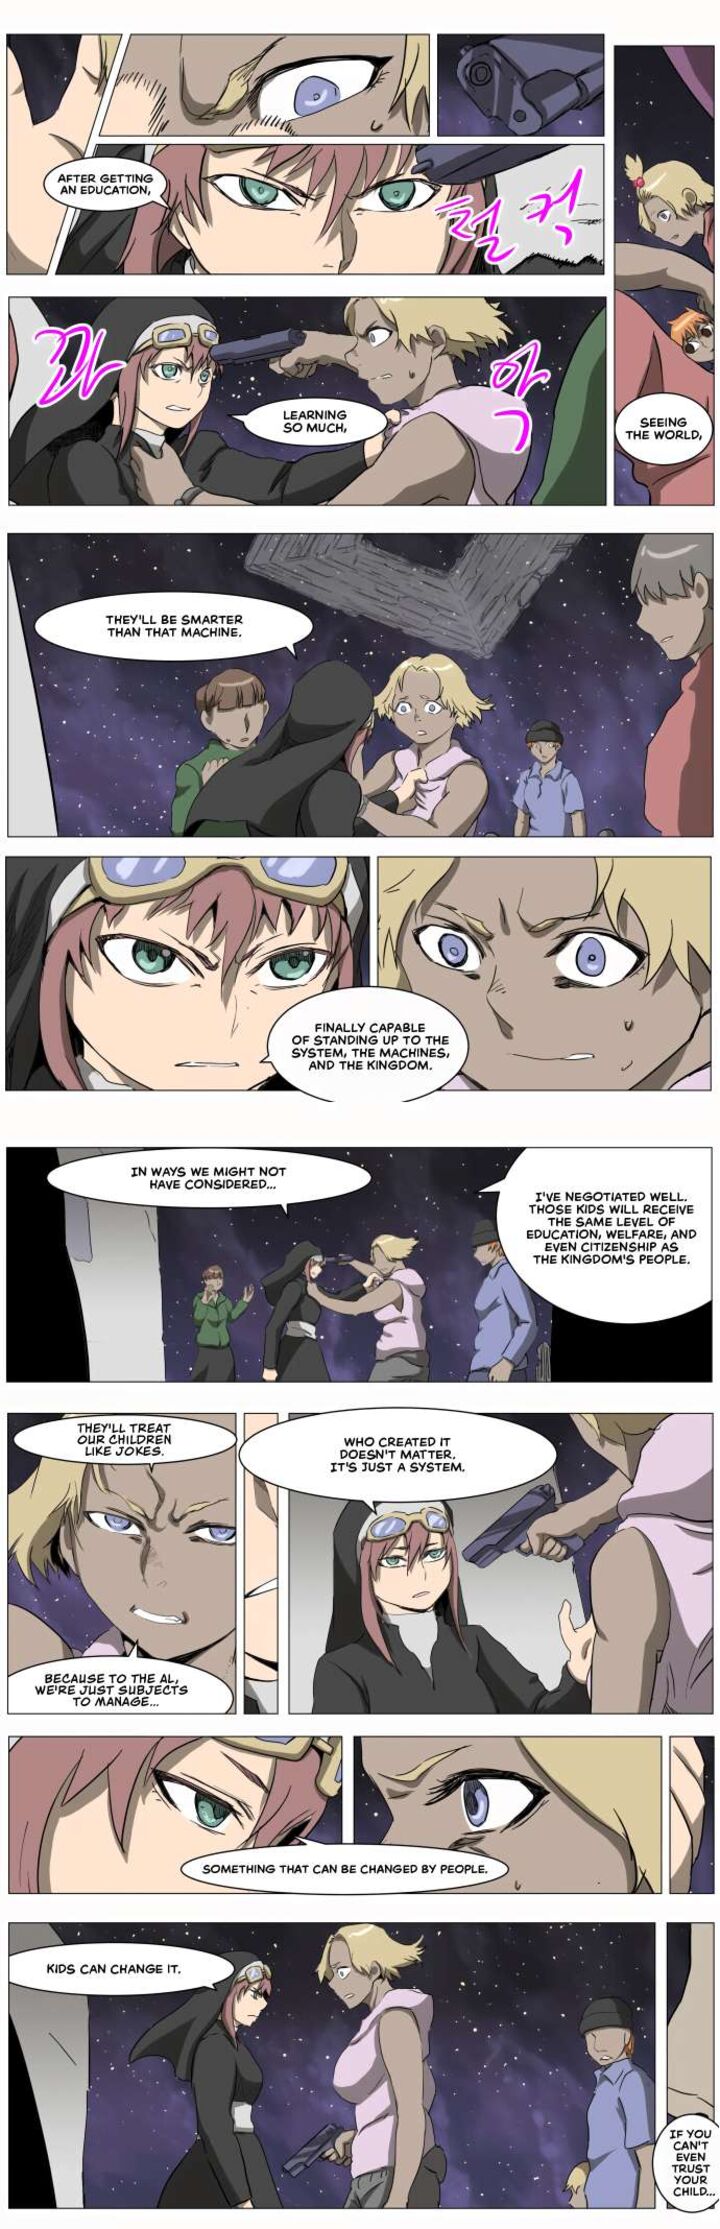 Knight Run Chapter 281 Page 14